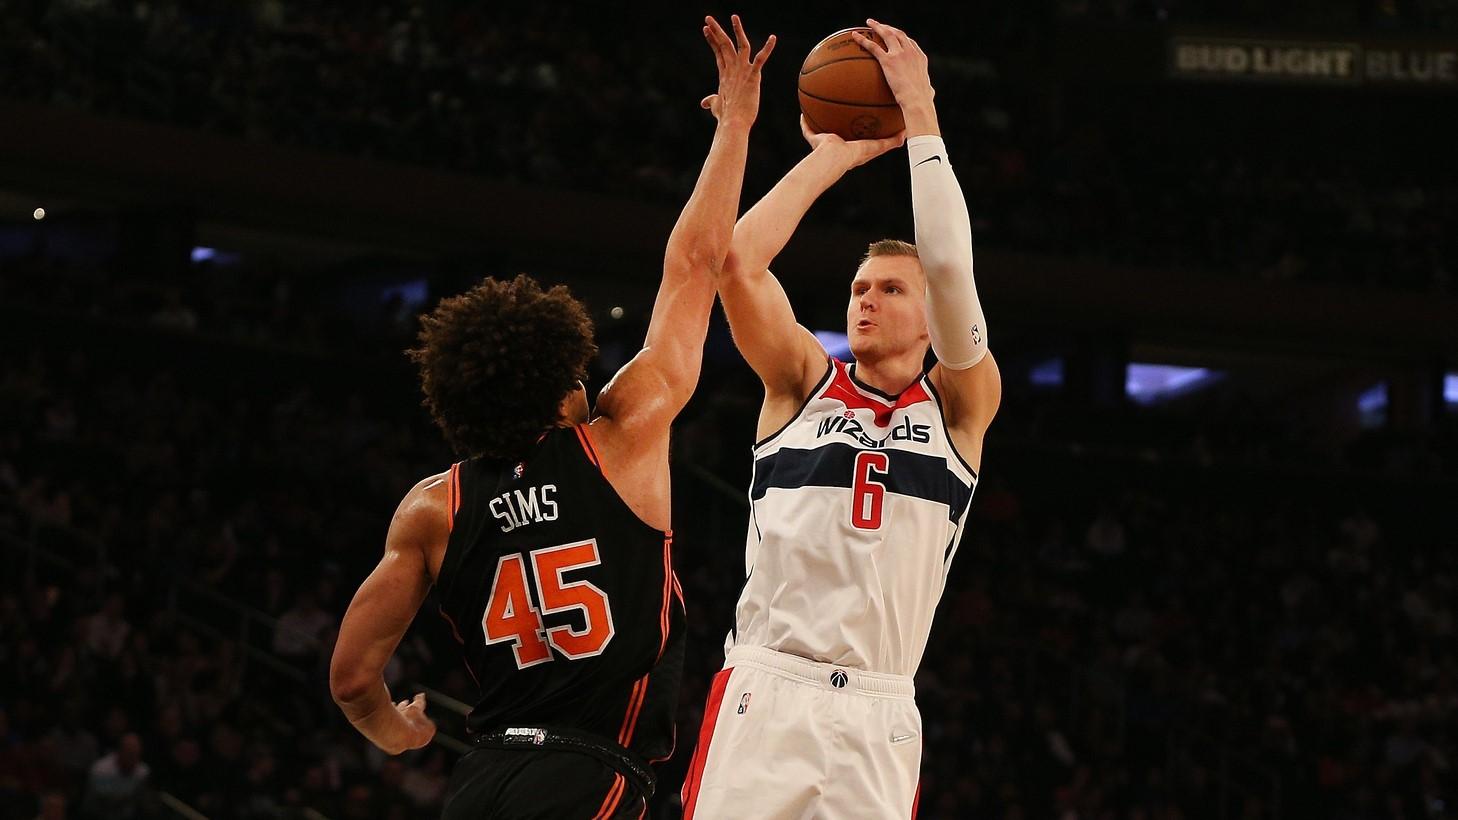 Mar 18, 2022; New York, New York, USA; Washington Wizards center Kristaps Porzingis (6) takes a shot against New York Knicks forward Jericho Sims (45) during the first half at Madison Square Garden. / Andy Marlin-USA TODAY Sports